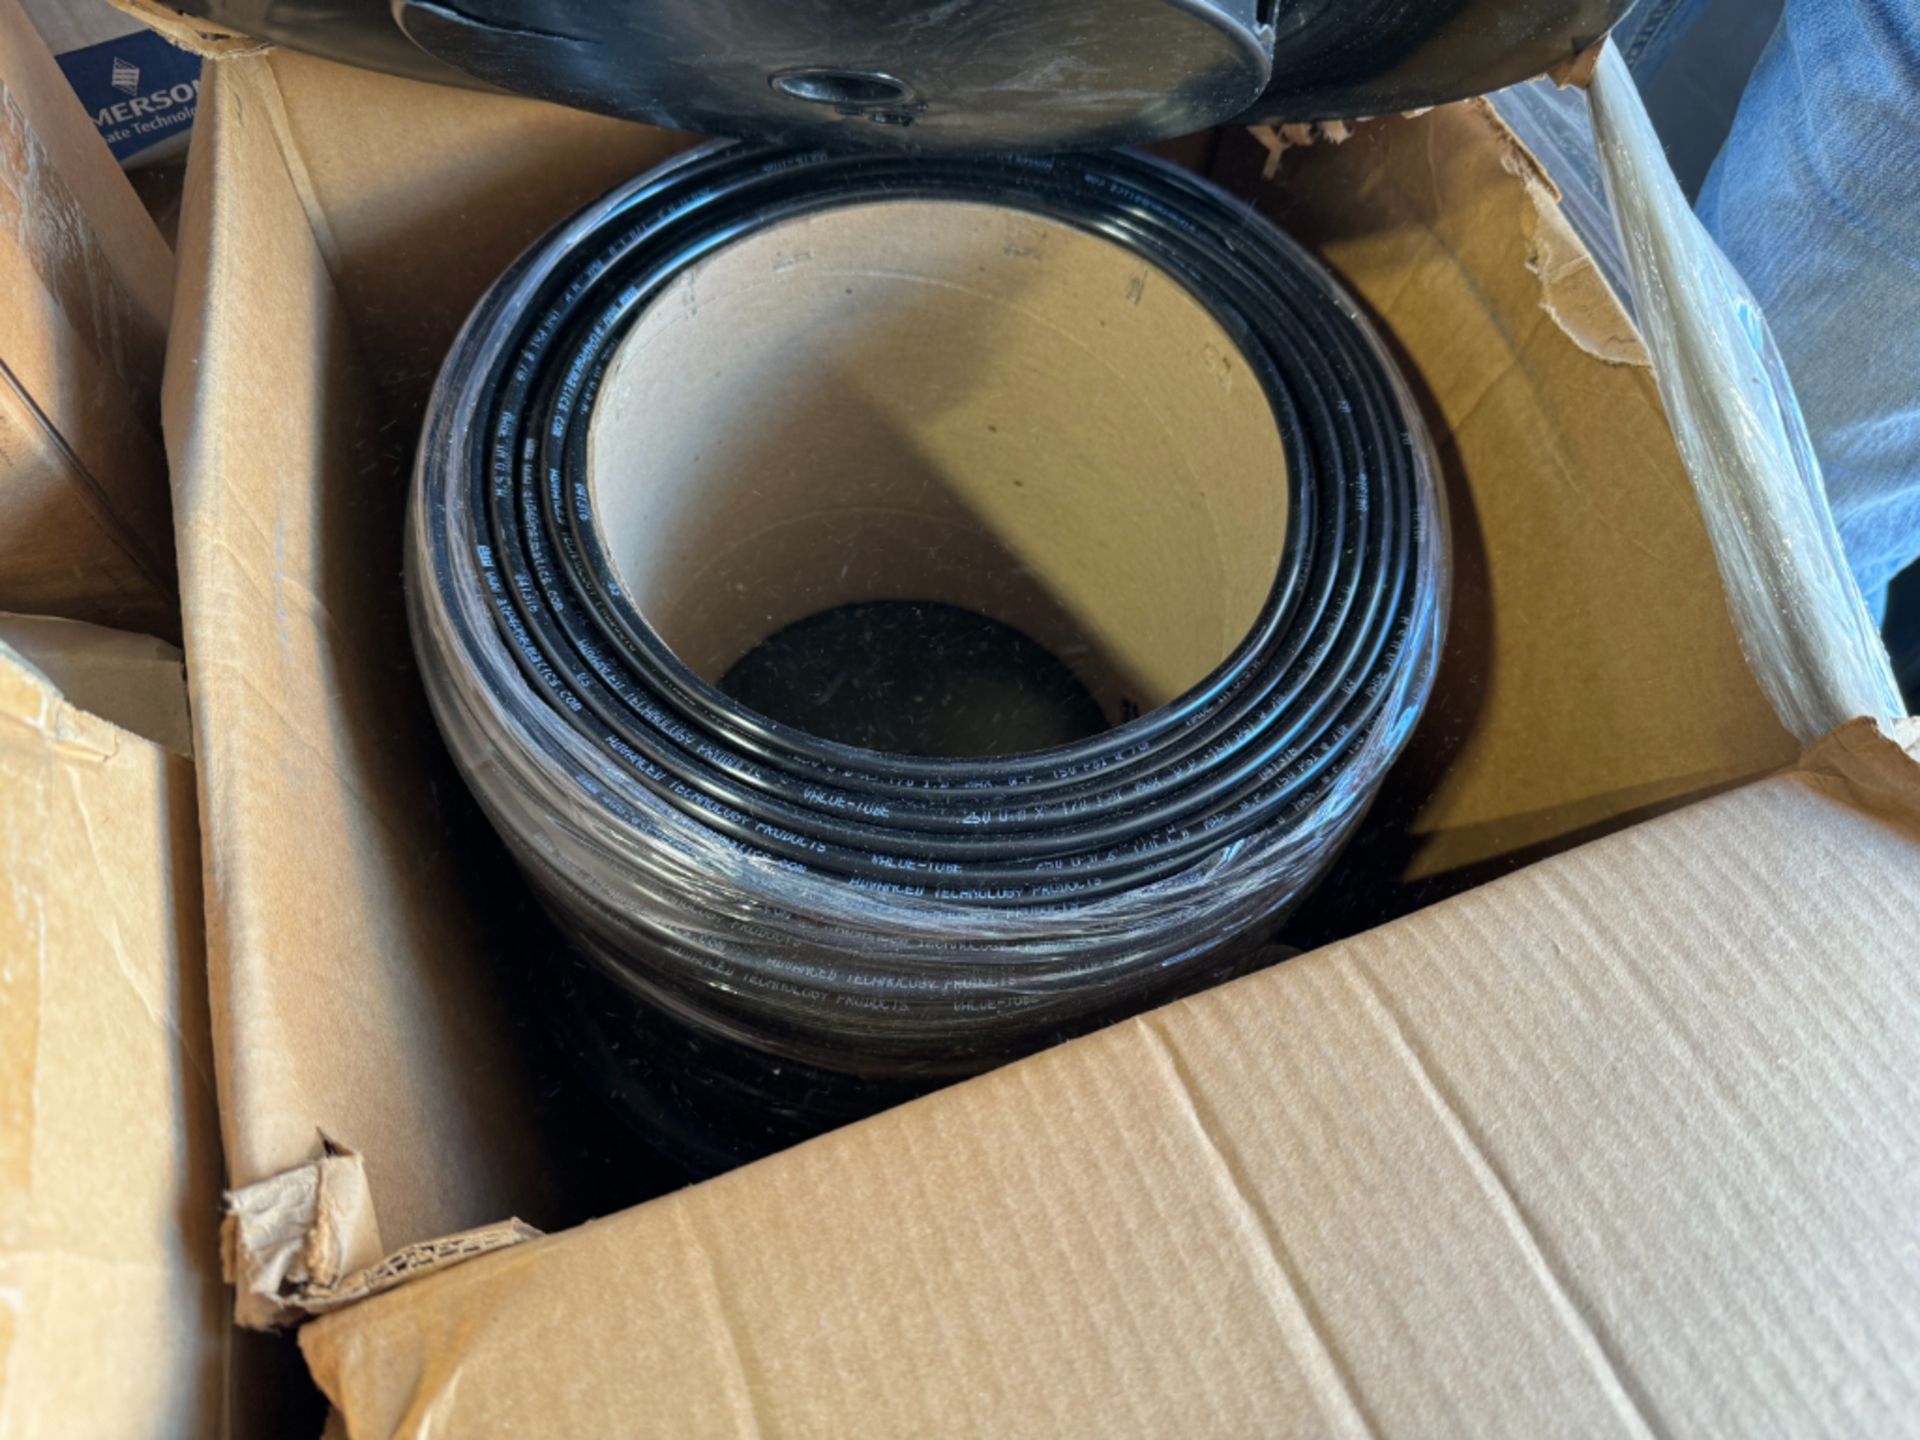 Suction Filters, Vent Fans, Electric Motor & Leak Tubing - Image 6 of 8